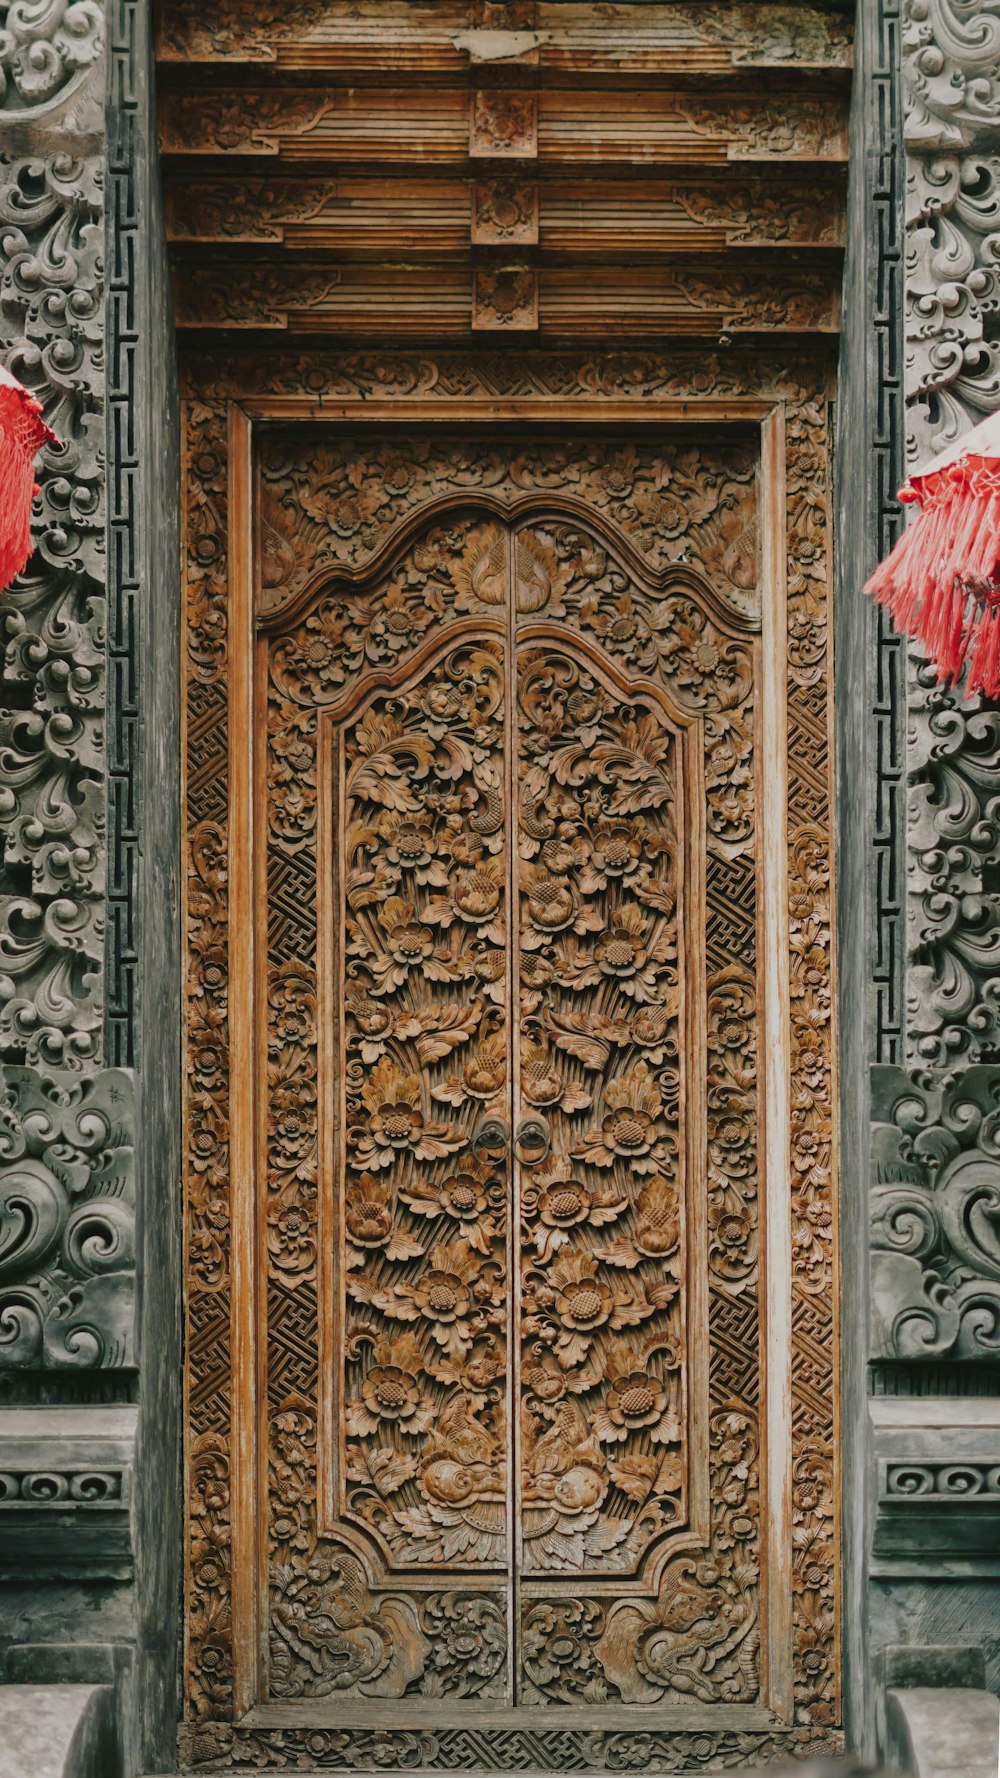 an ornate wooden door with red umbrellas hanging from it